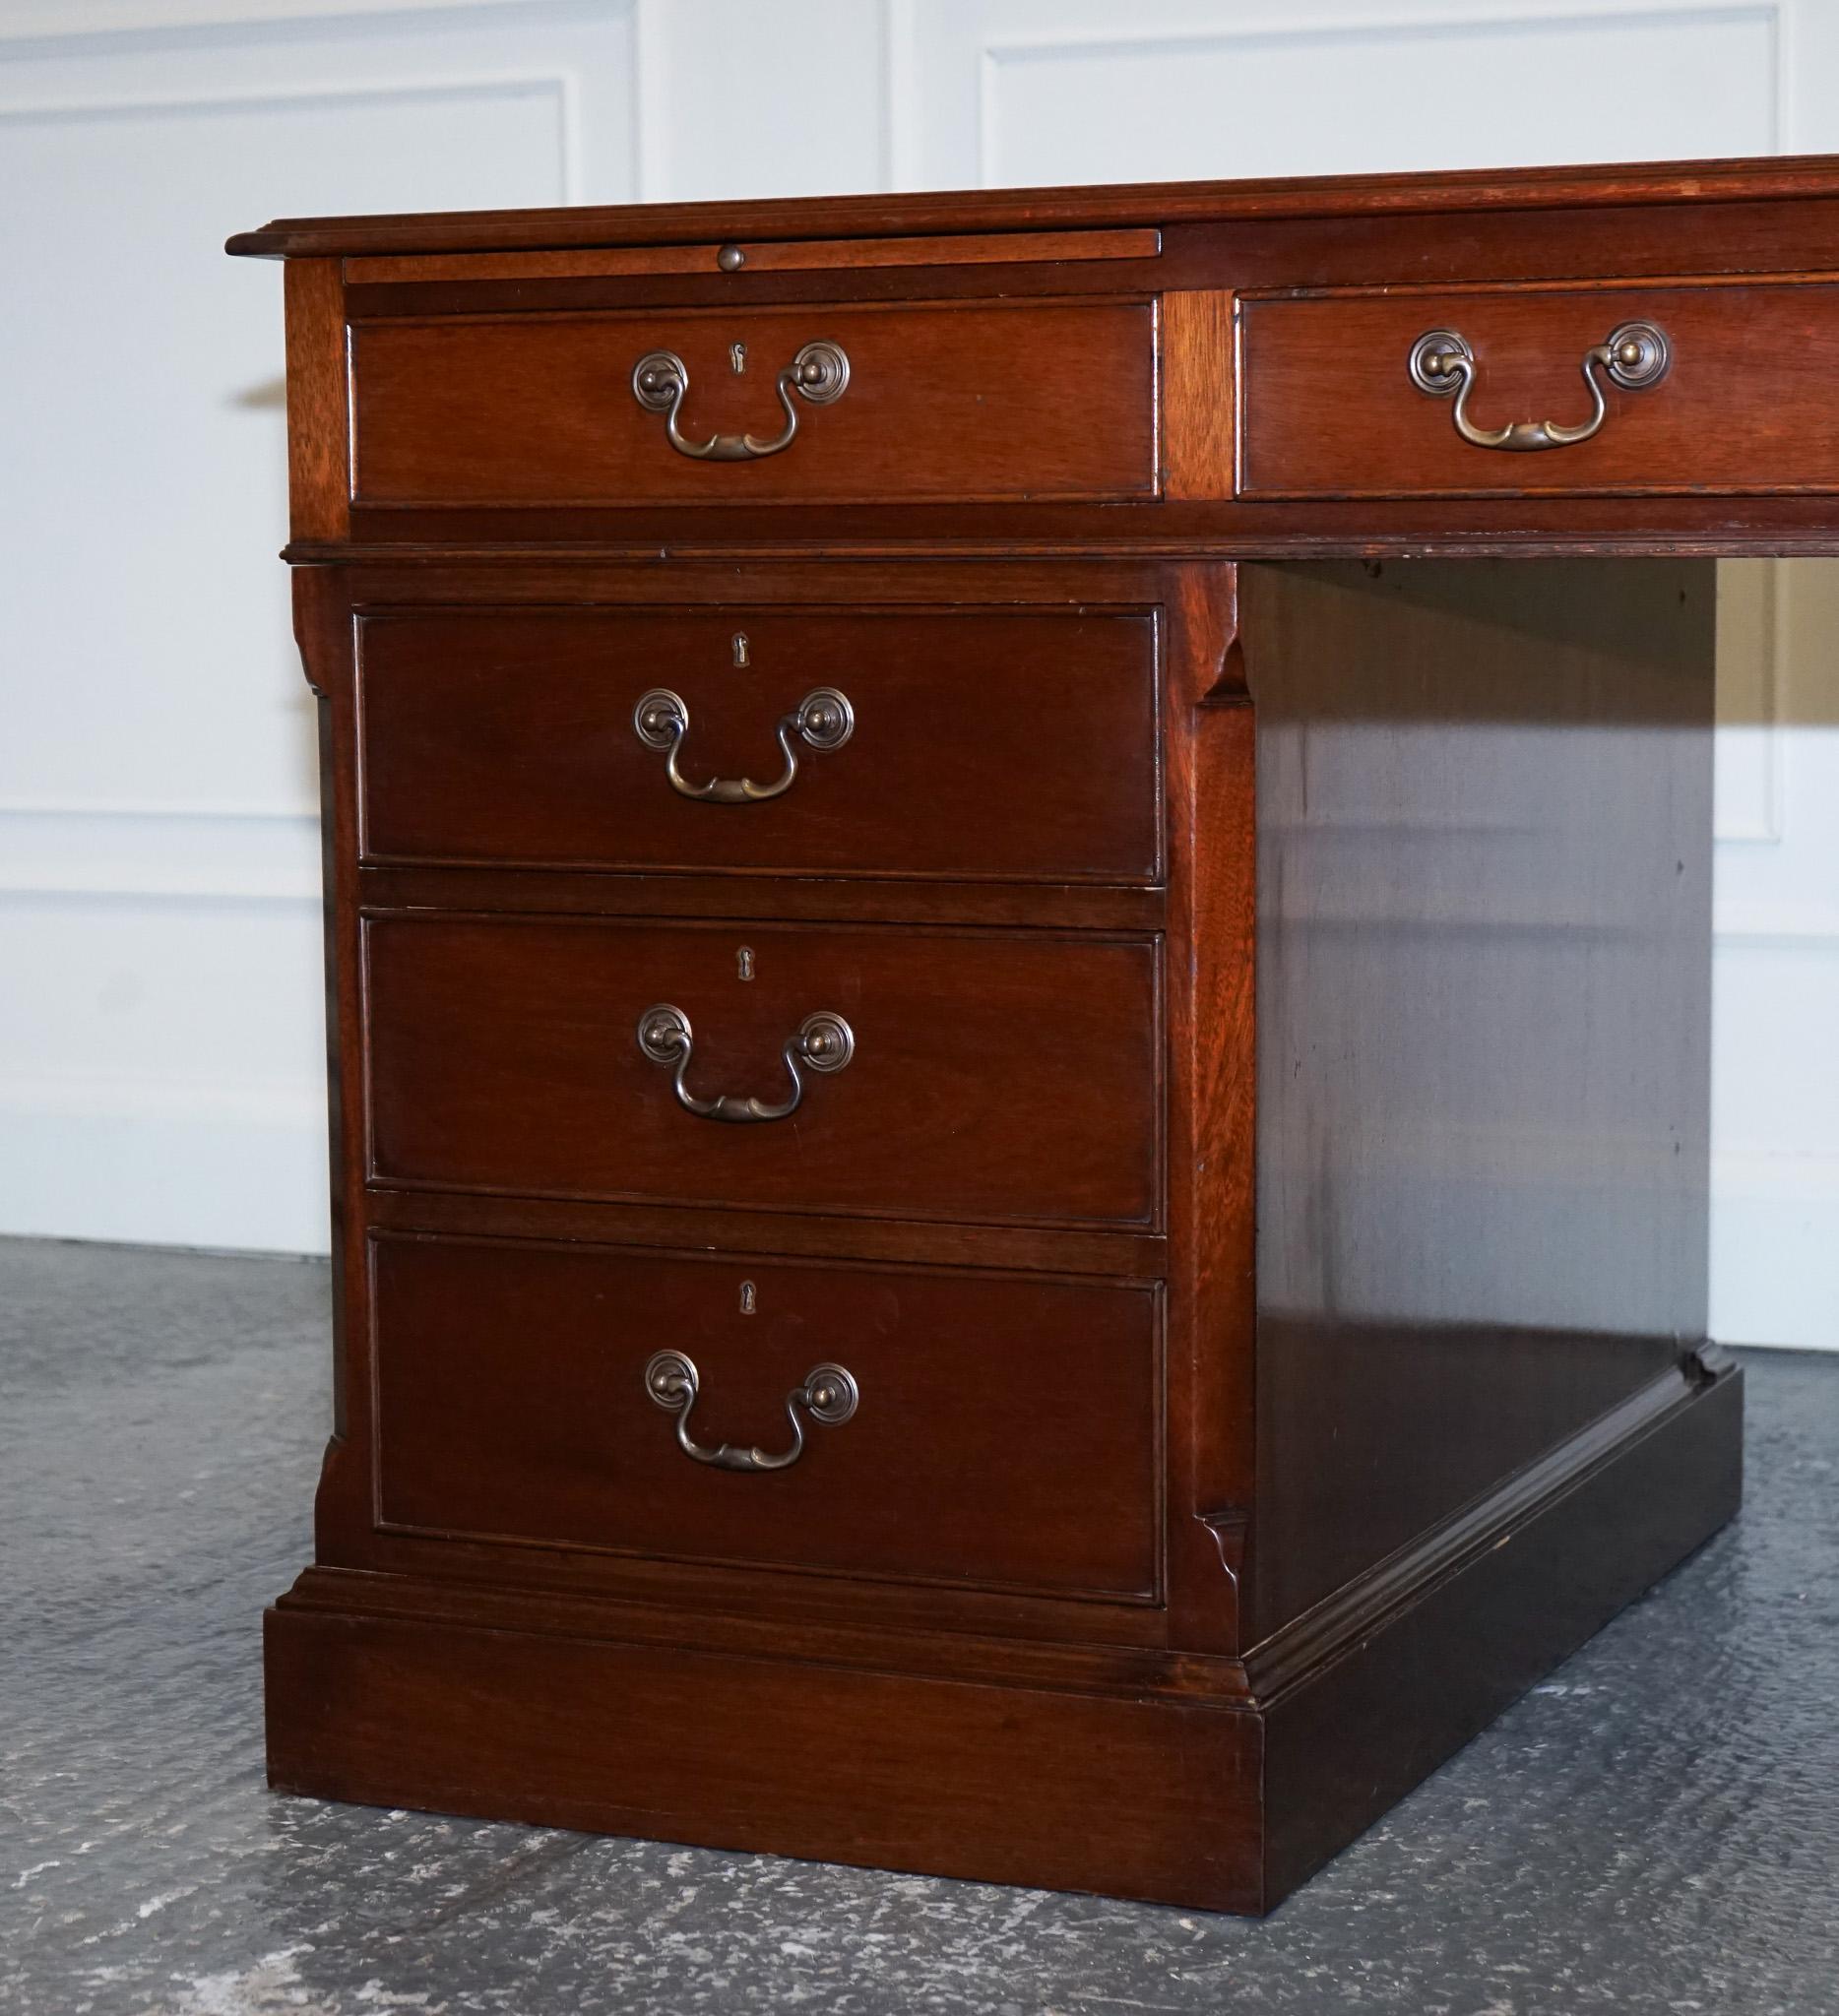 Hardwood STUNNING LARGE TWiN PEDESTAL DESK BROWN LEATHER TOP SLIDING OUT TRAYS 8 DRAWERS For Sale